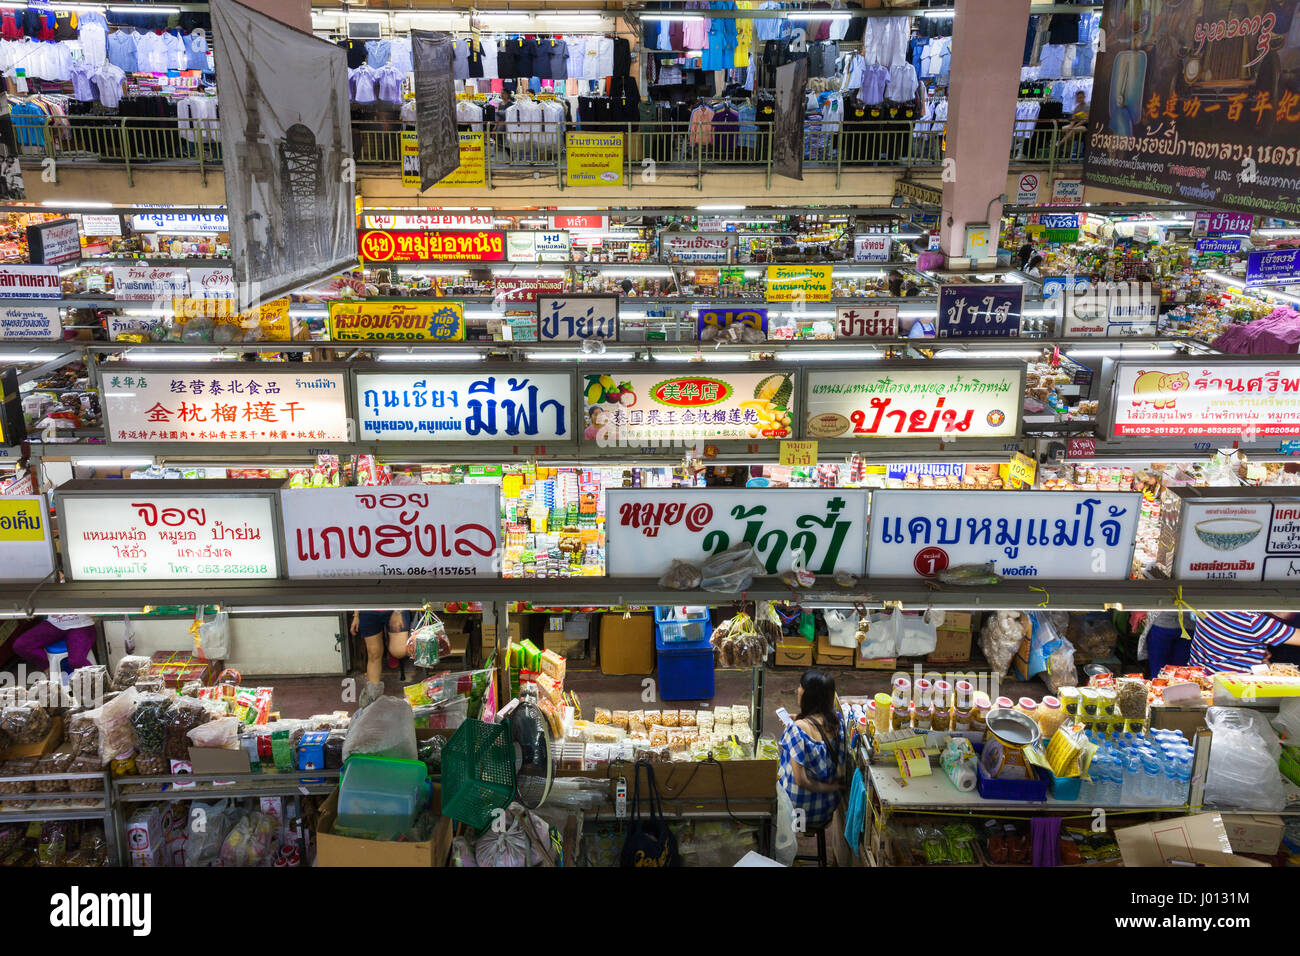 Chiang Mai, Thailand - August 27, 2016: High angle view of the Warorot market stalls on August 27, 2016 in Chiang Mai, Thailand. Stock Photo